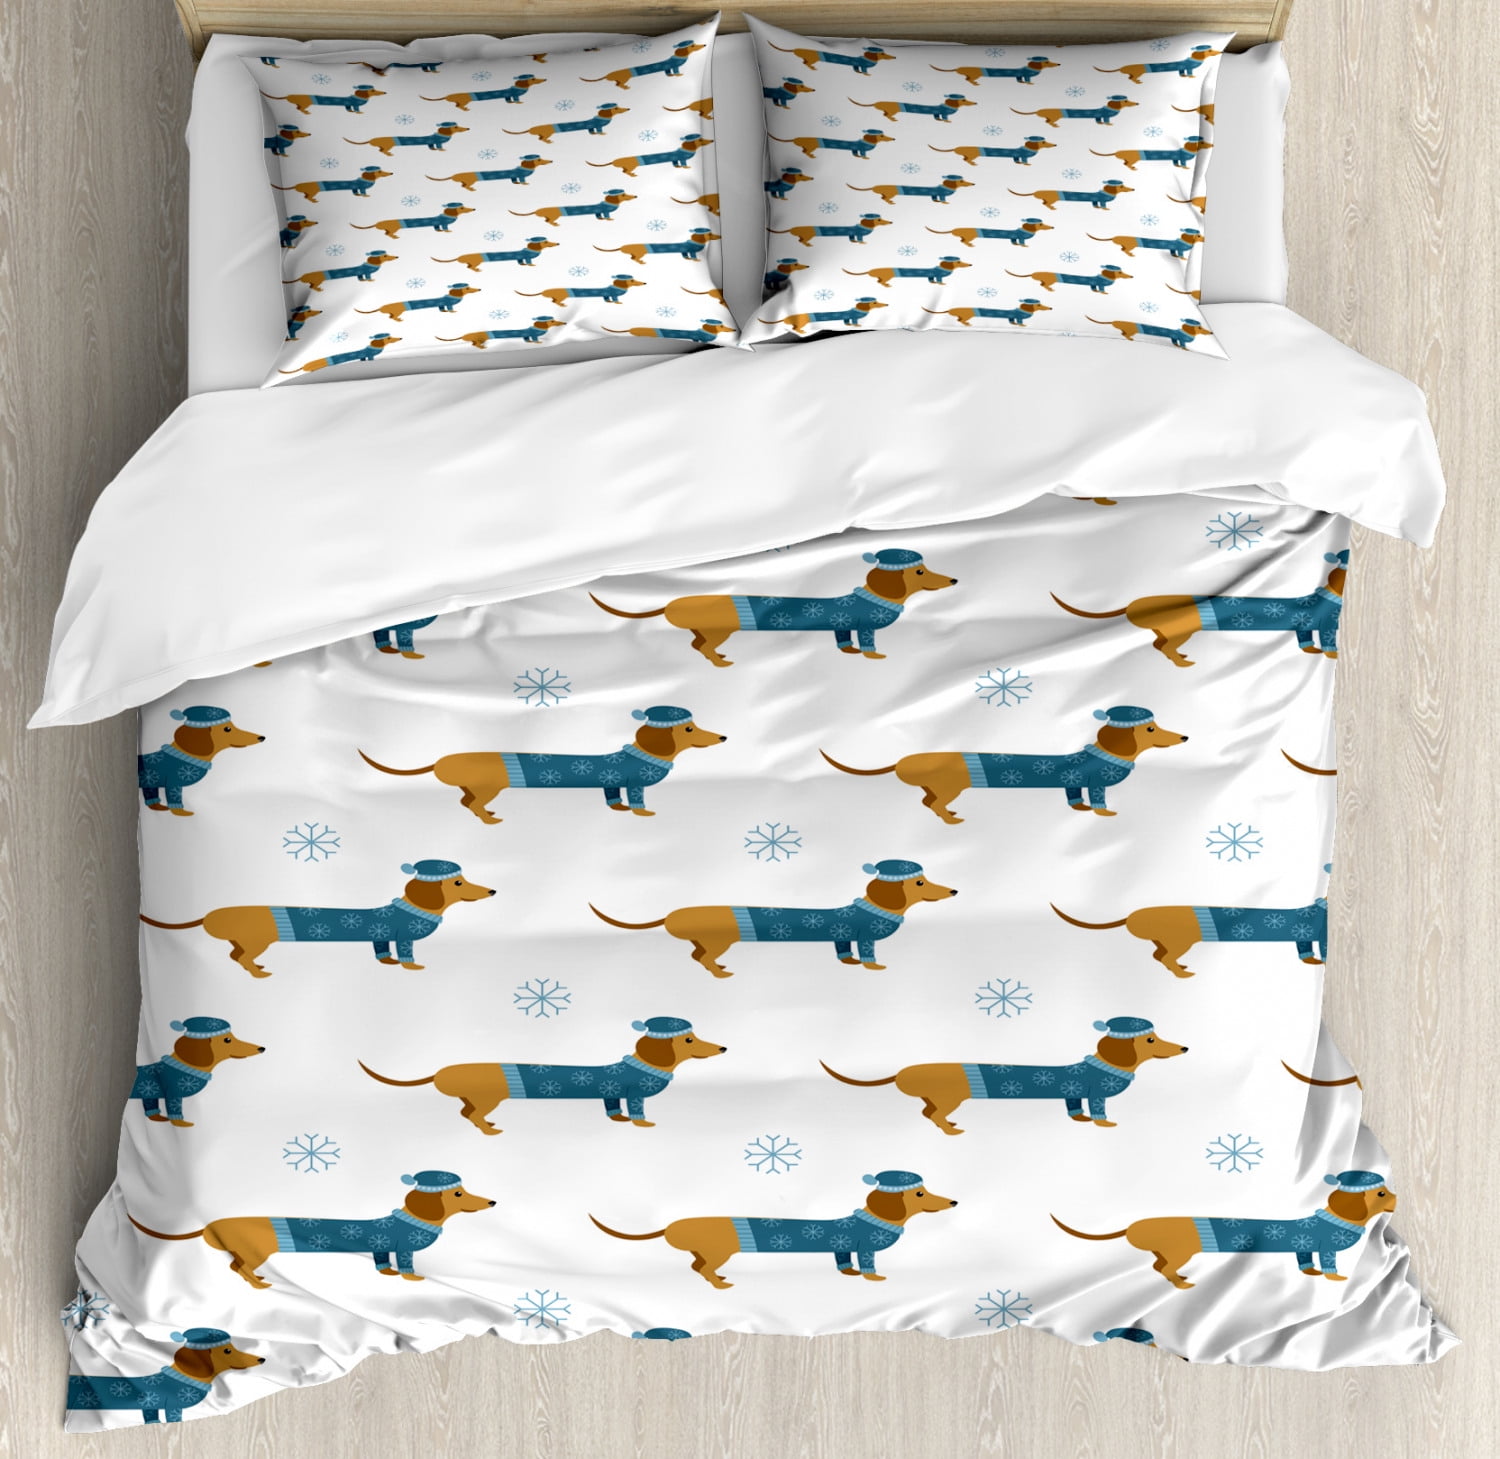 Dachshund Bedding Set 3 Piece Colorful Dog Print Duvet Cover Queen King Sizes 